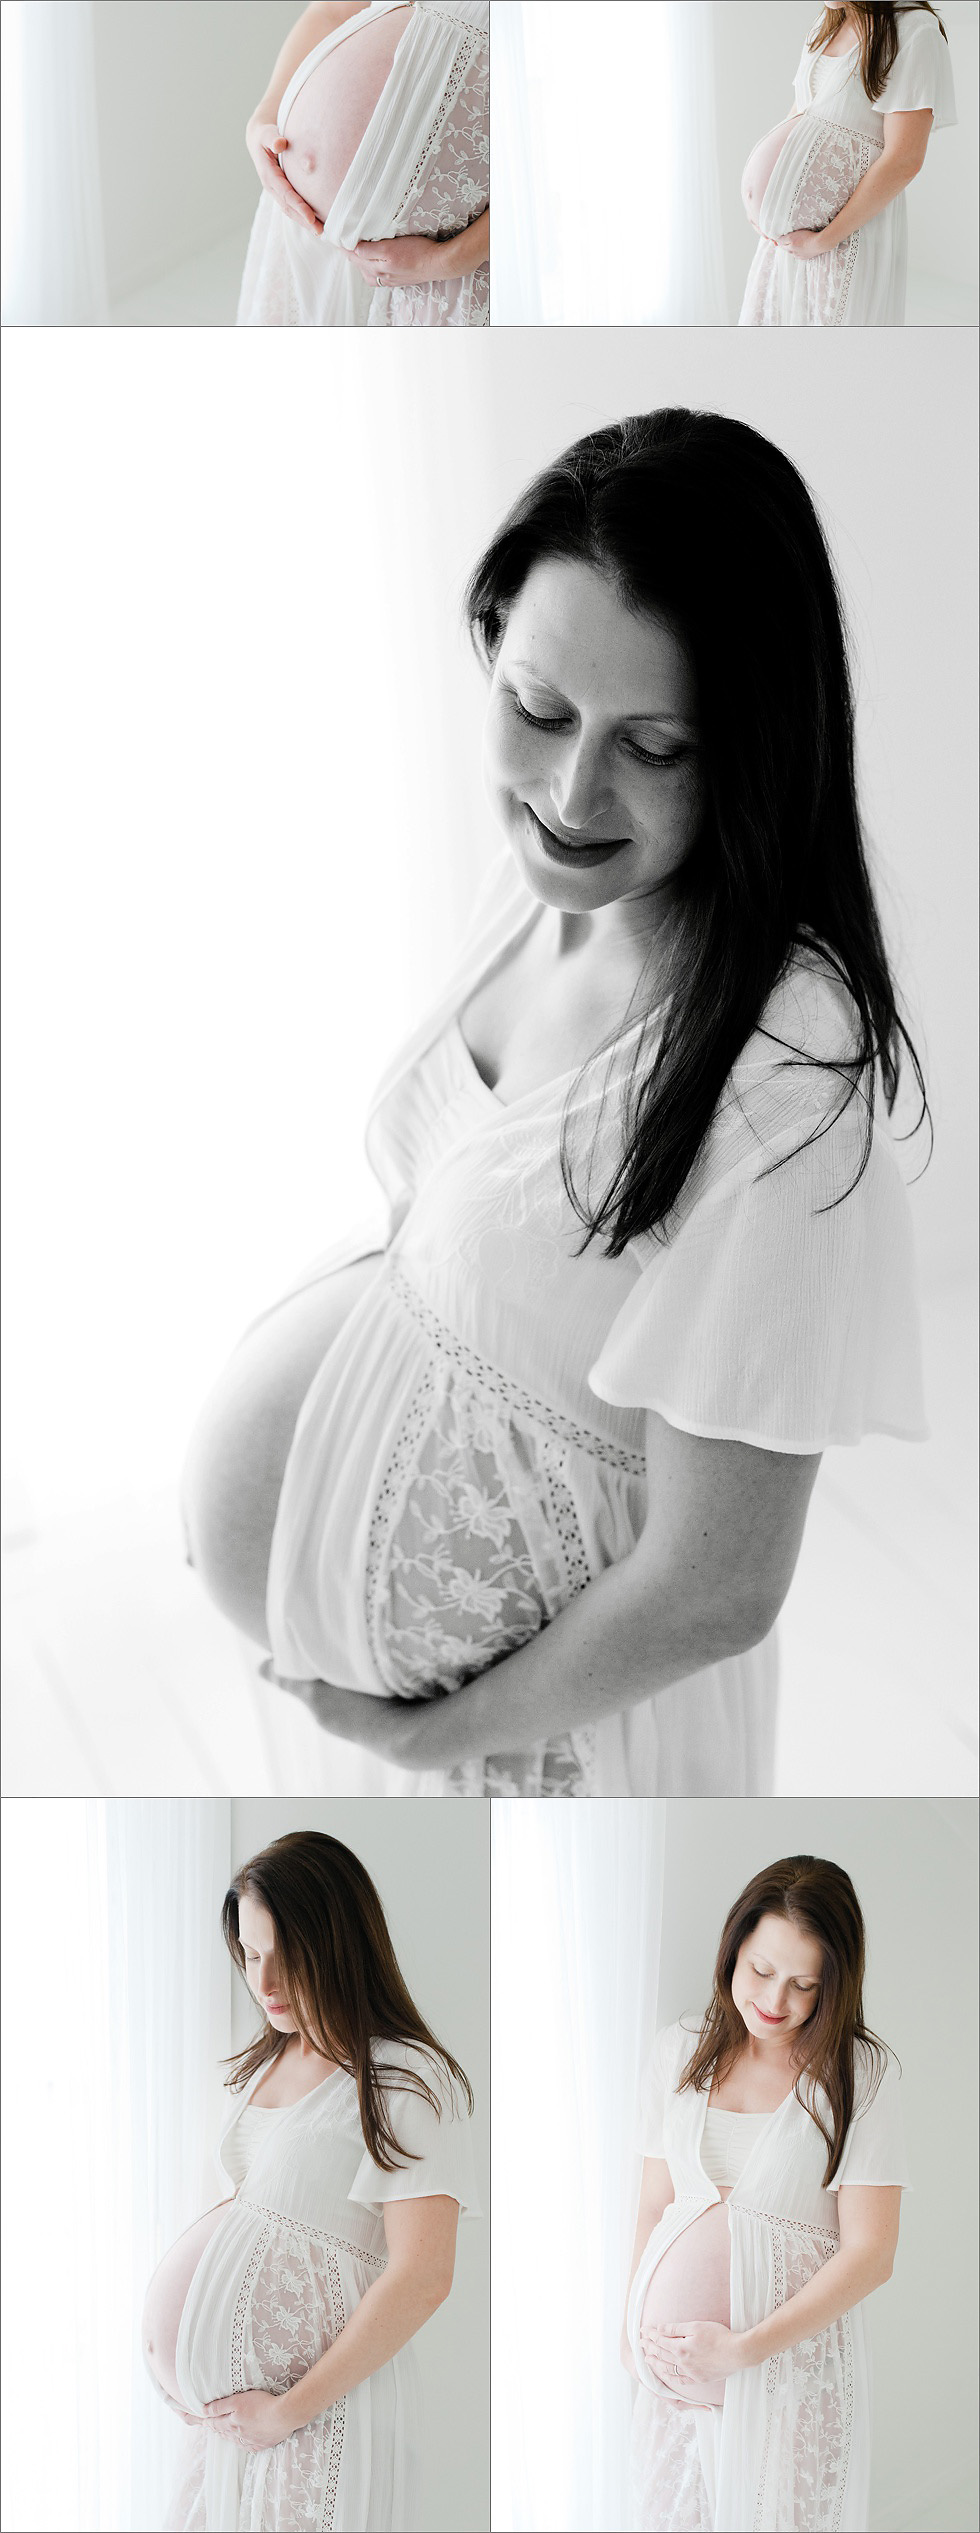 stunning expectant mother waiting for rainbow baby